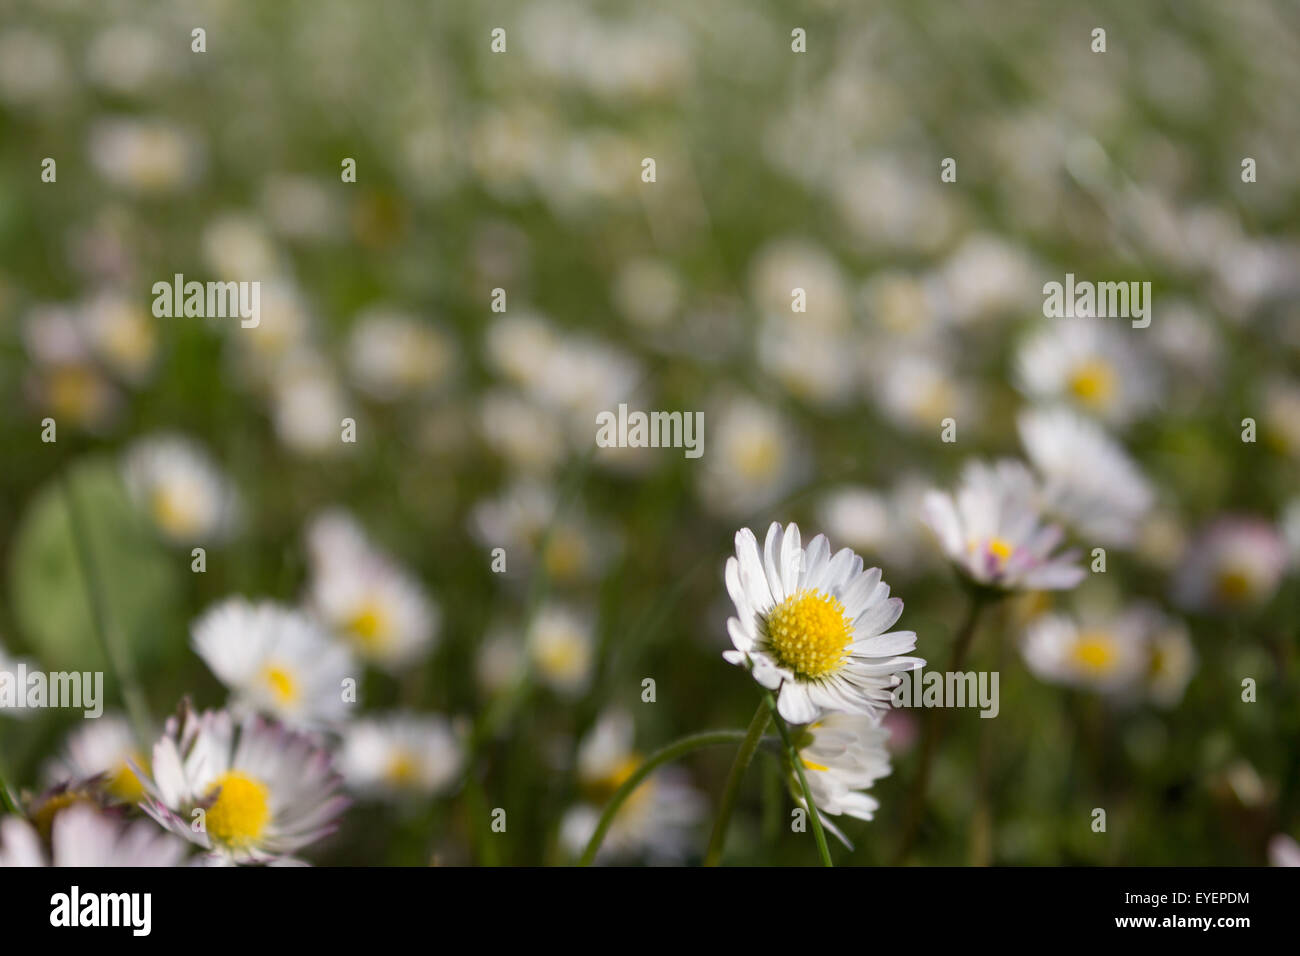 daisies, daisy flowers in meadow Stock Photo